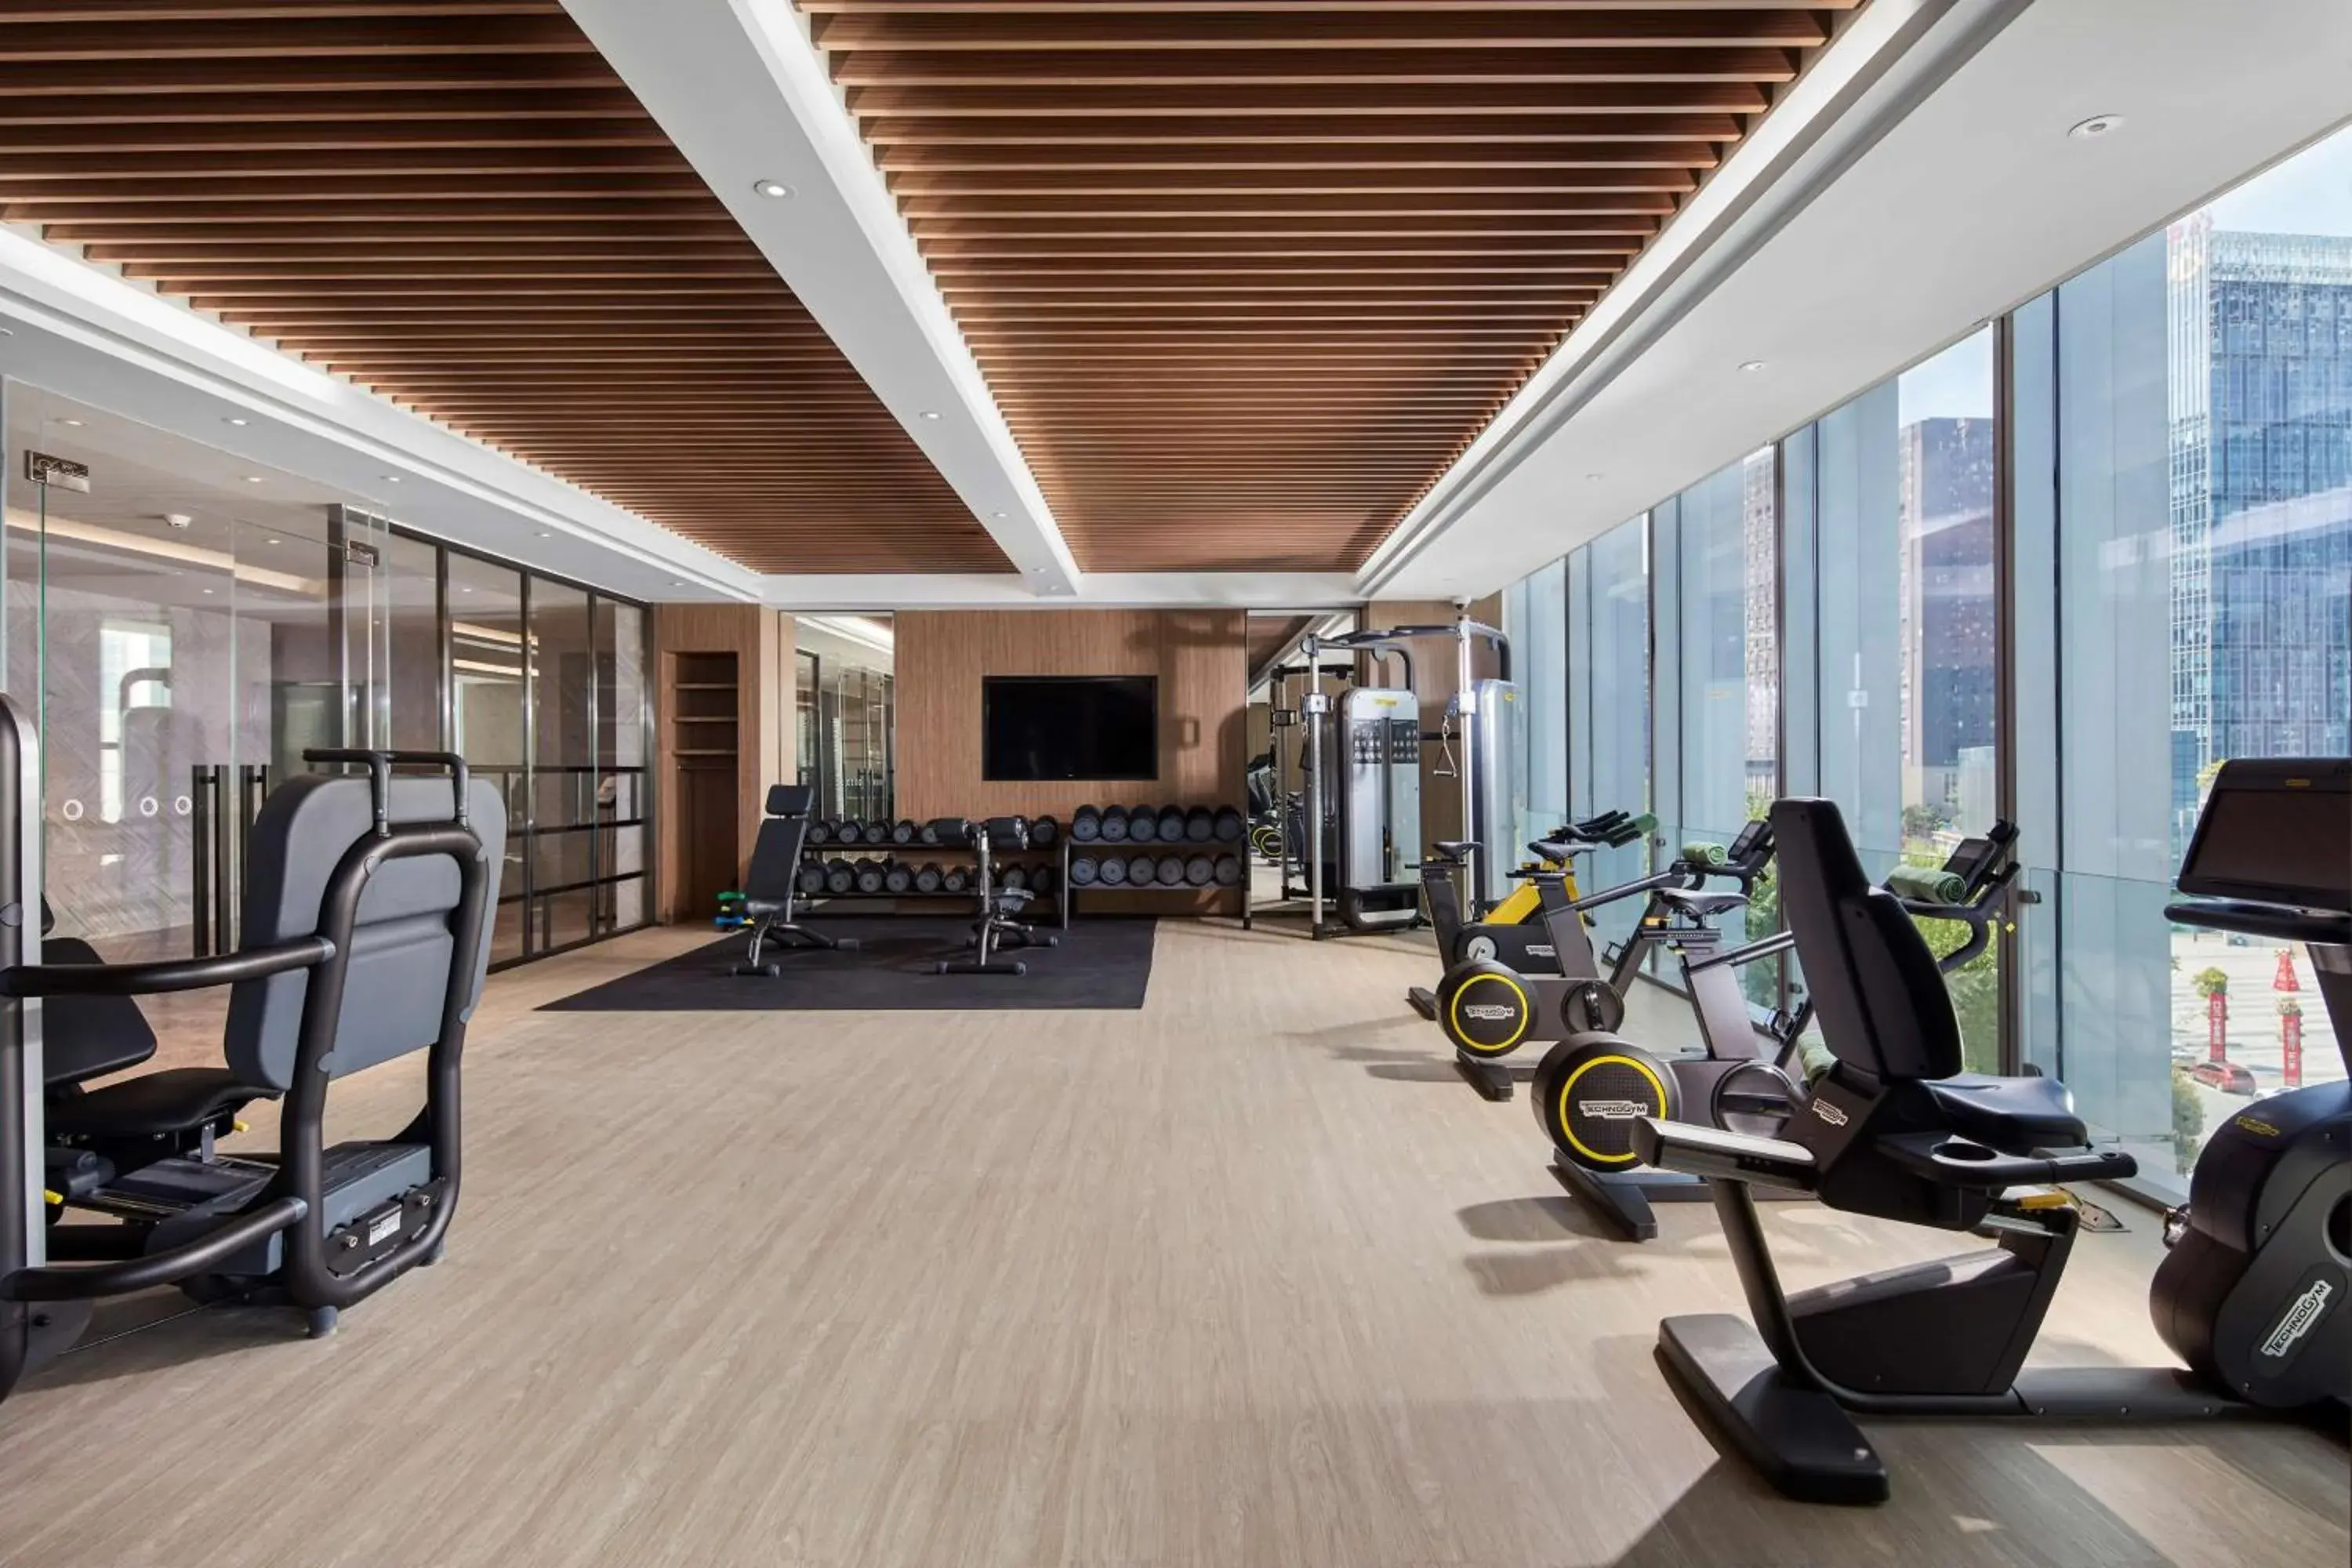 Fitness centre/facilities, Fitness Center/Facilities in Hilton Guiyang